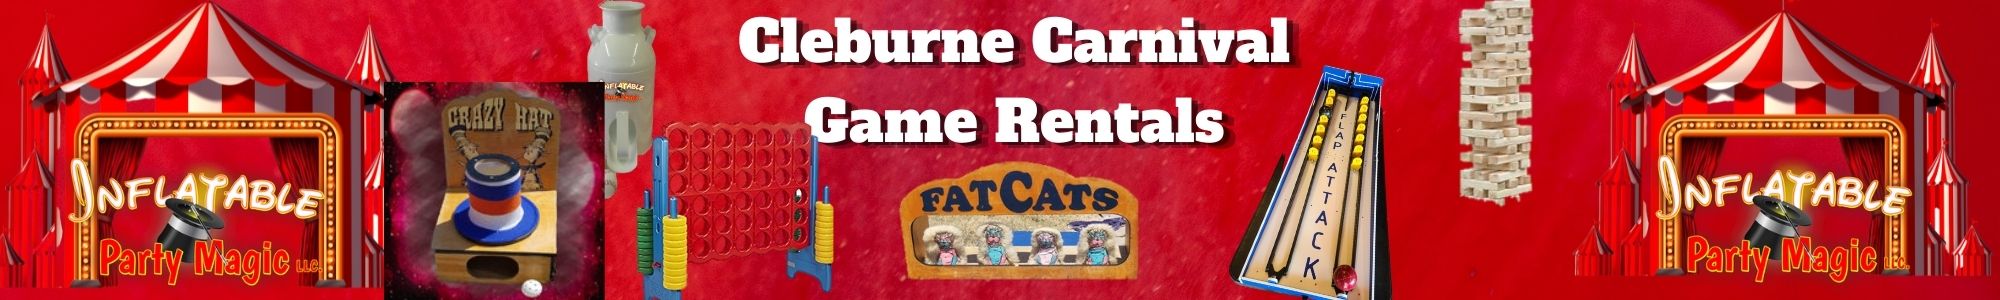 Cleburne Carnival Game and Giant Backyard Game Rentals